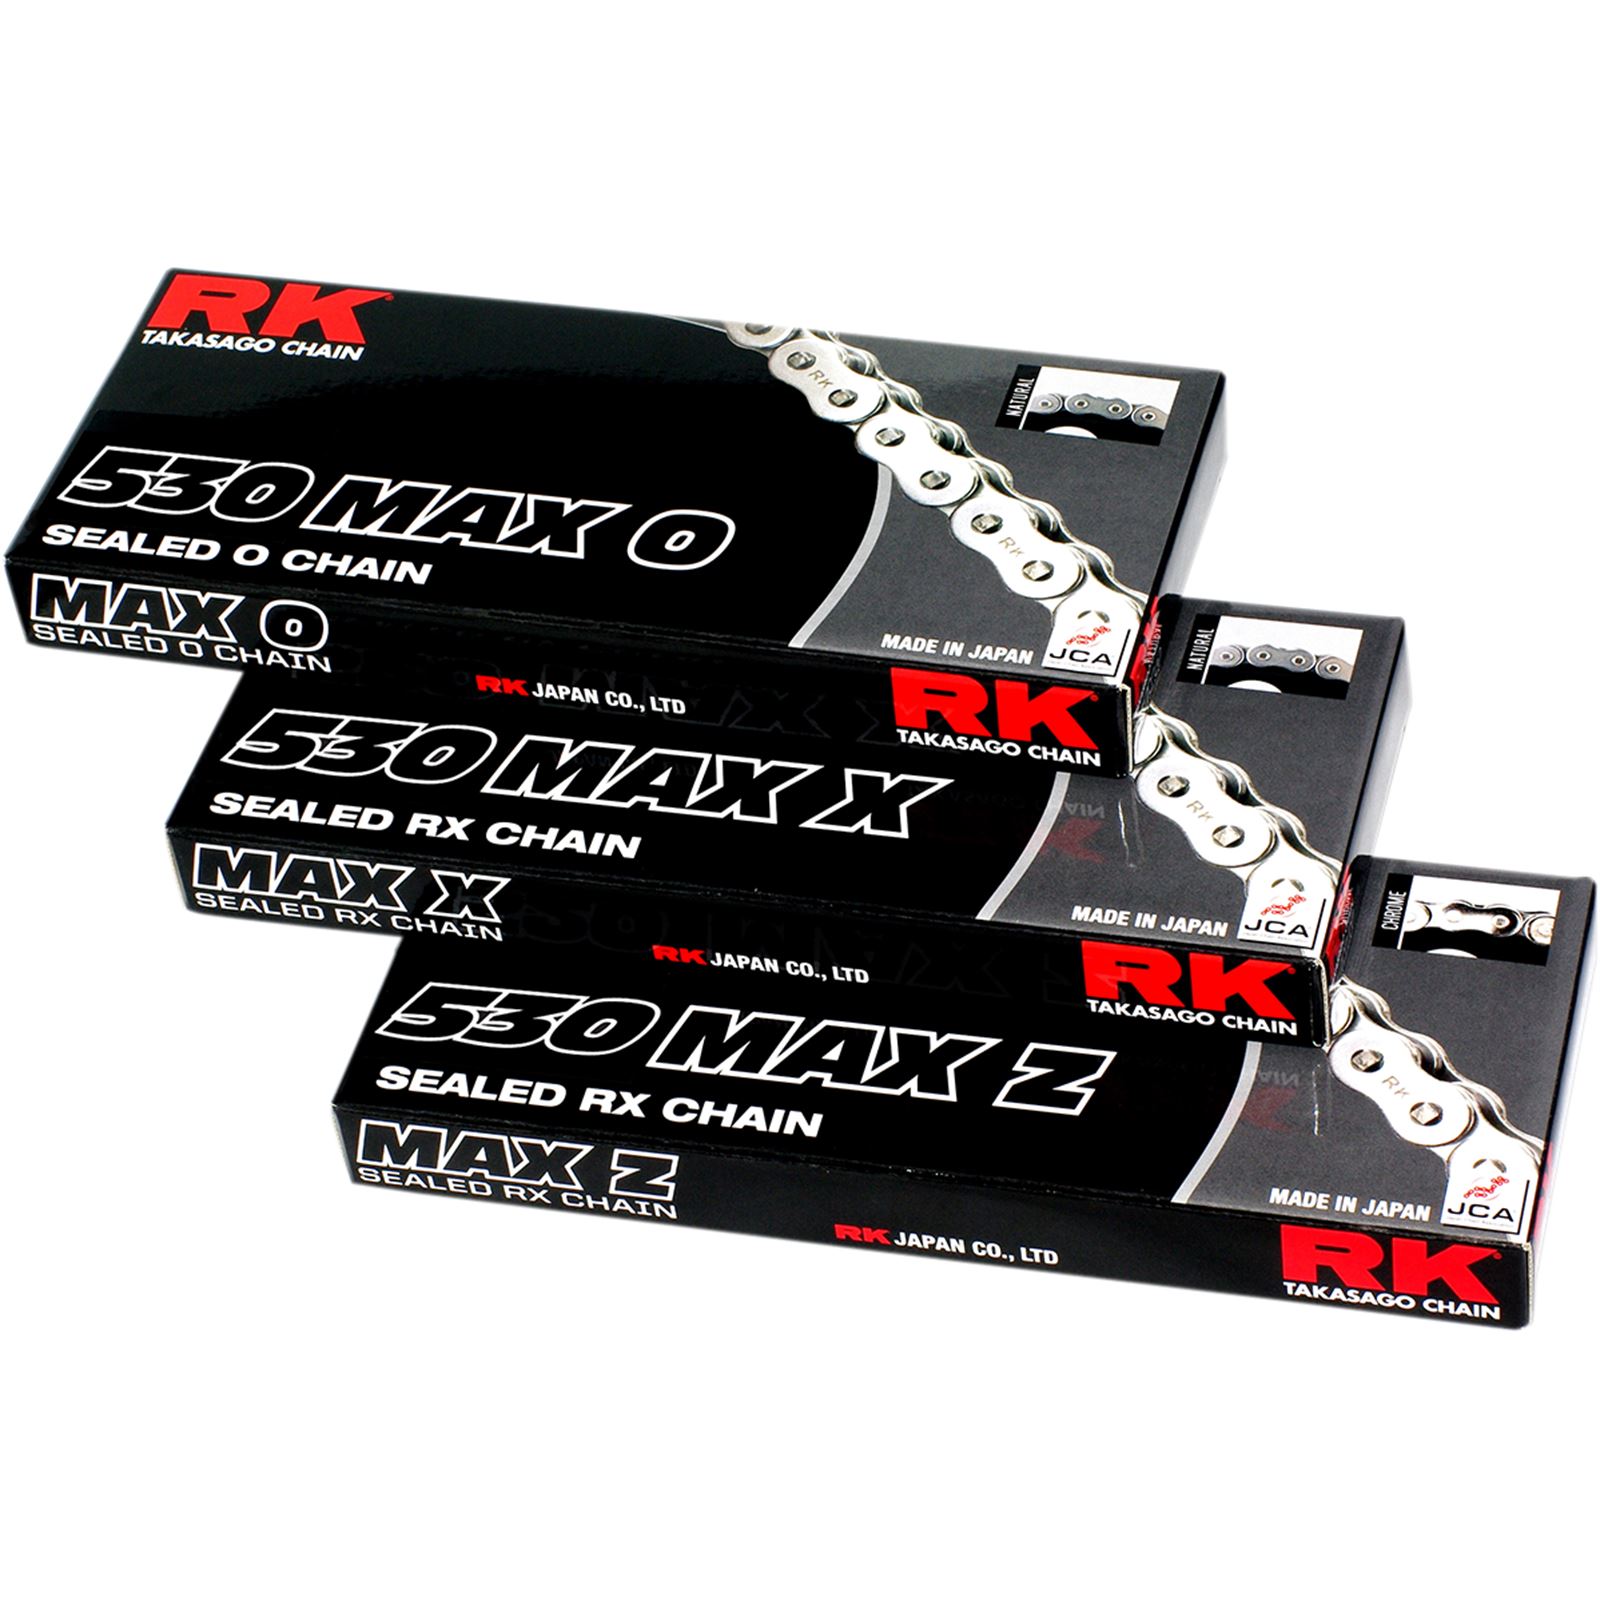 RK Excel 530 Max Z - Chain - 150 Links - Gold